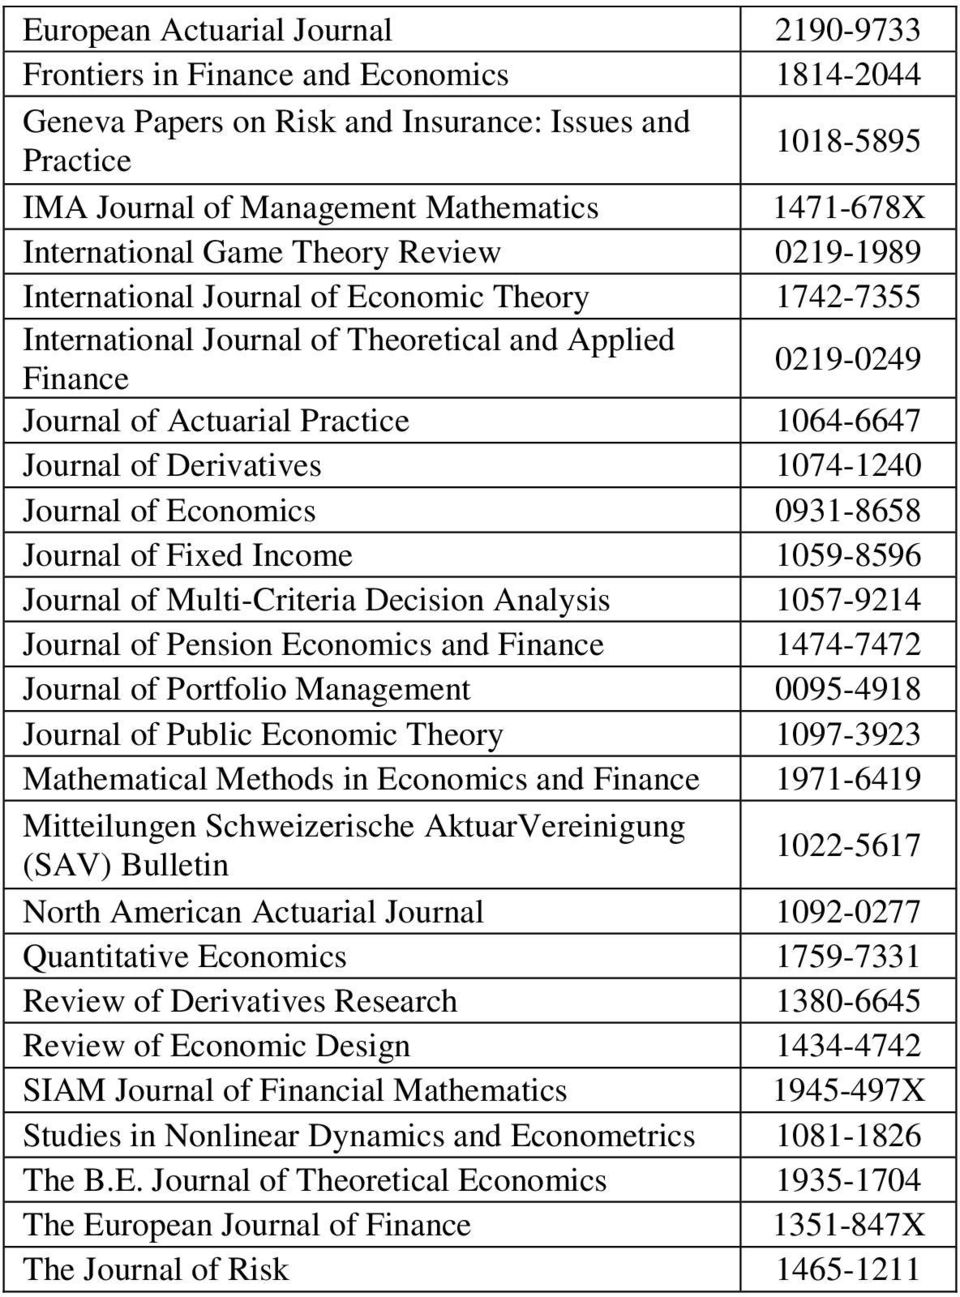 1064-6647 Journal of Derivatives 1074-1240 Journal of Economics 0931-8658 Journal of Fixed Income 1059-8596 Journal of Multi-Criteria Decision Analysis 1057-9214 Journal of Pension Economics and